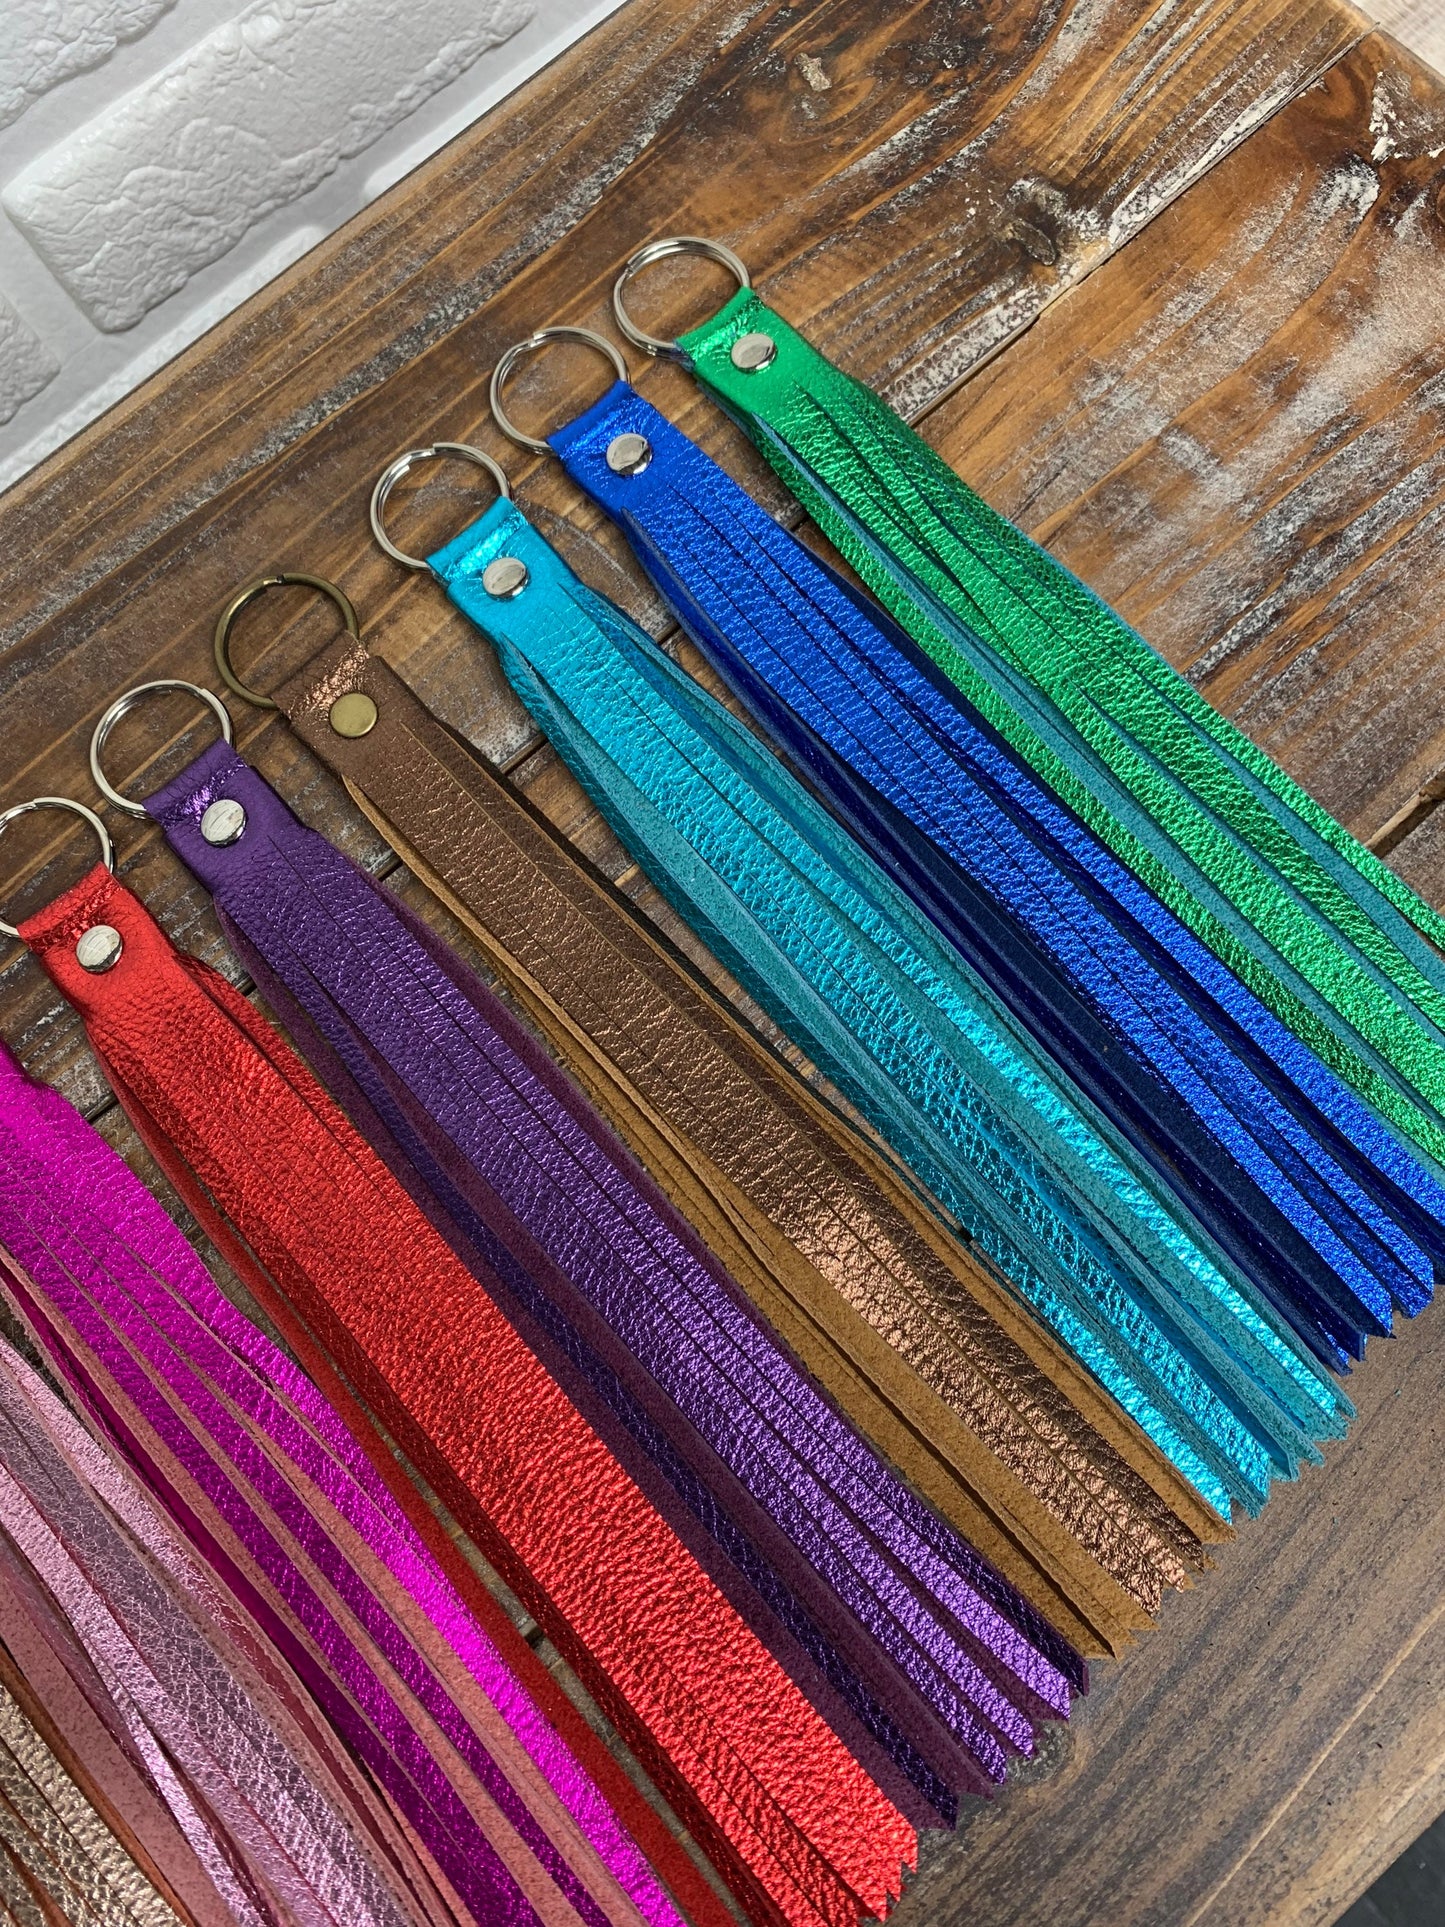 WADORN 10 Colors Leather Keychain Tassels, Colorful Leather Tassel Pendants Faux Leather Handbag Car Tassel Charms Decoration with